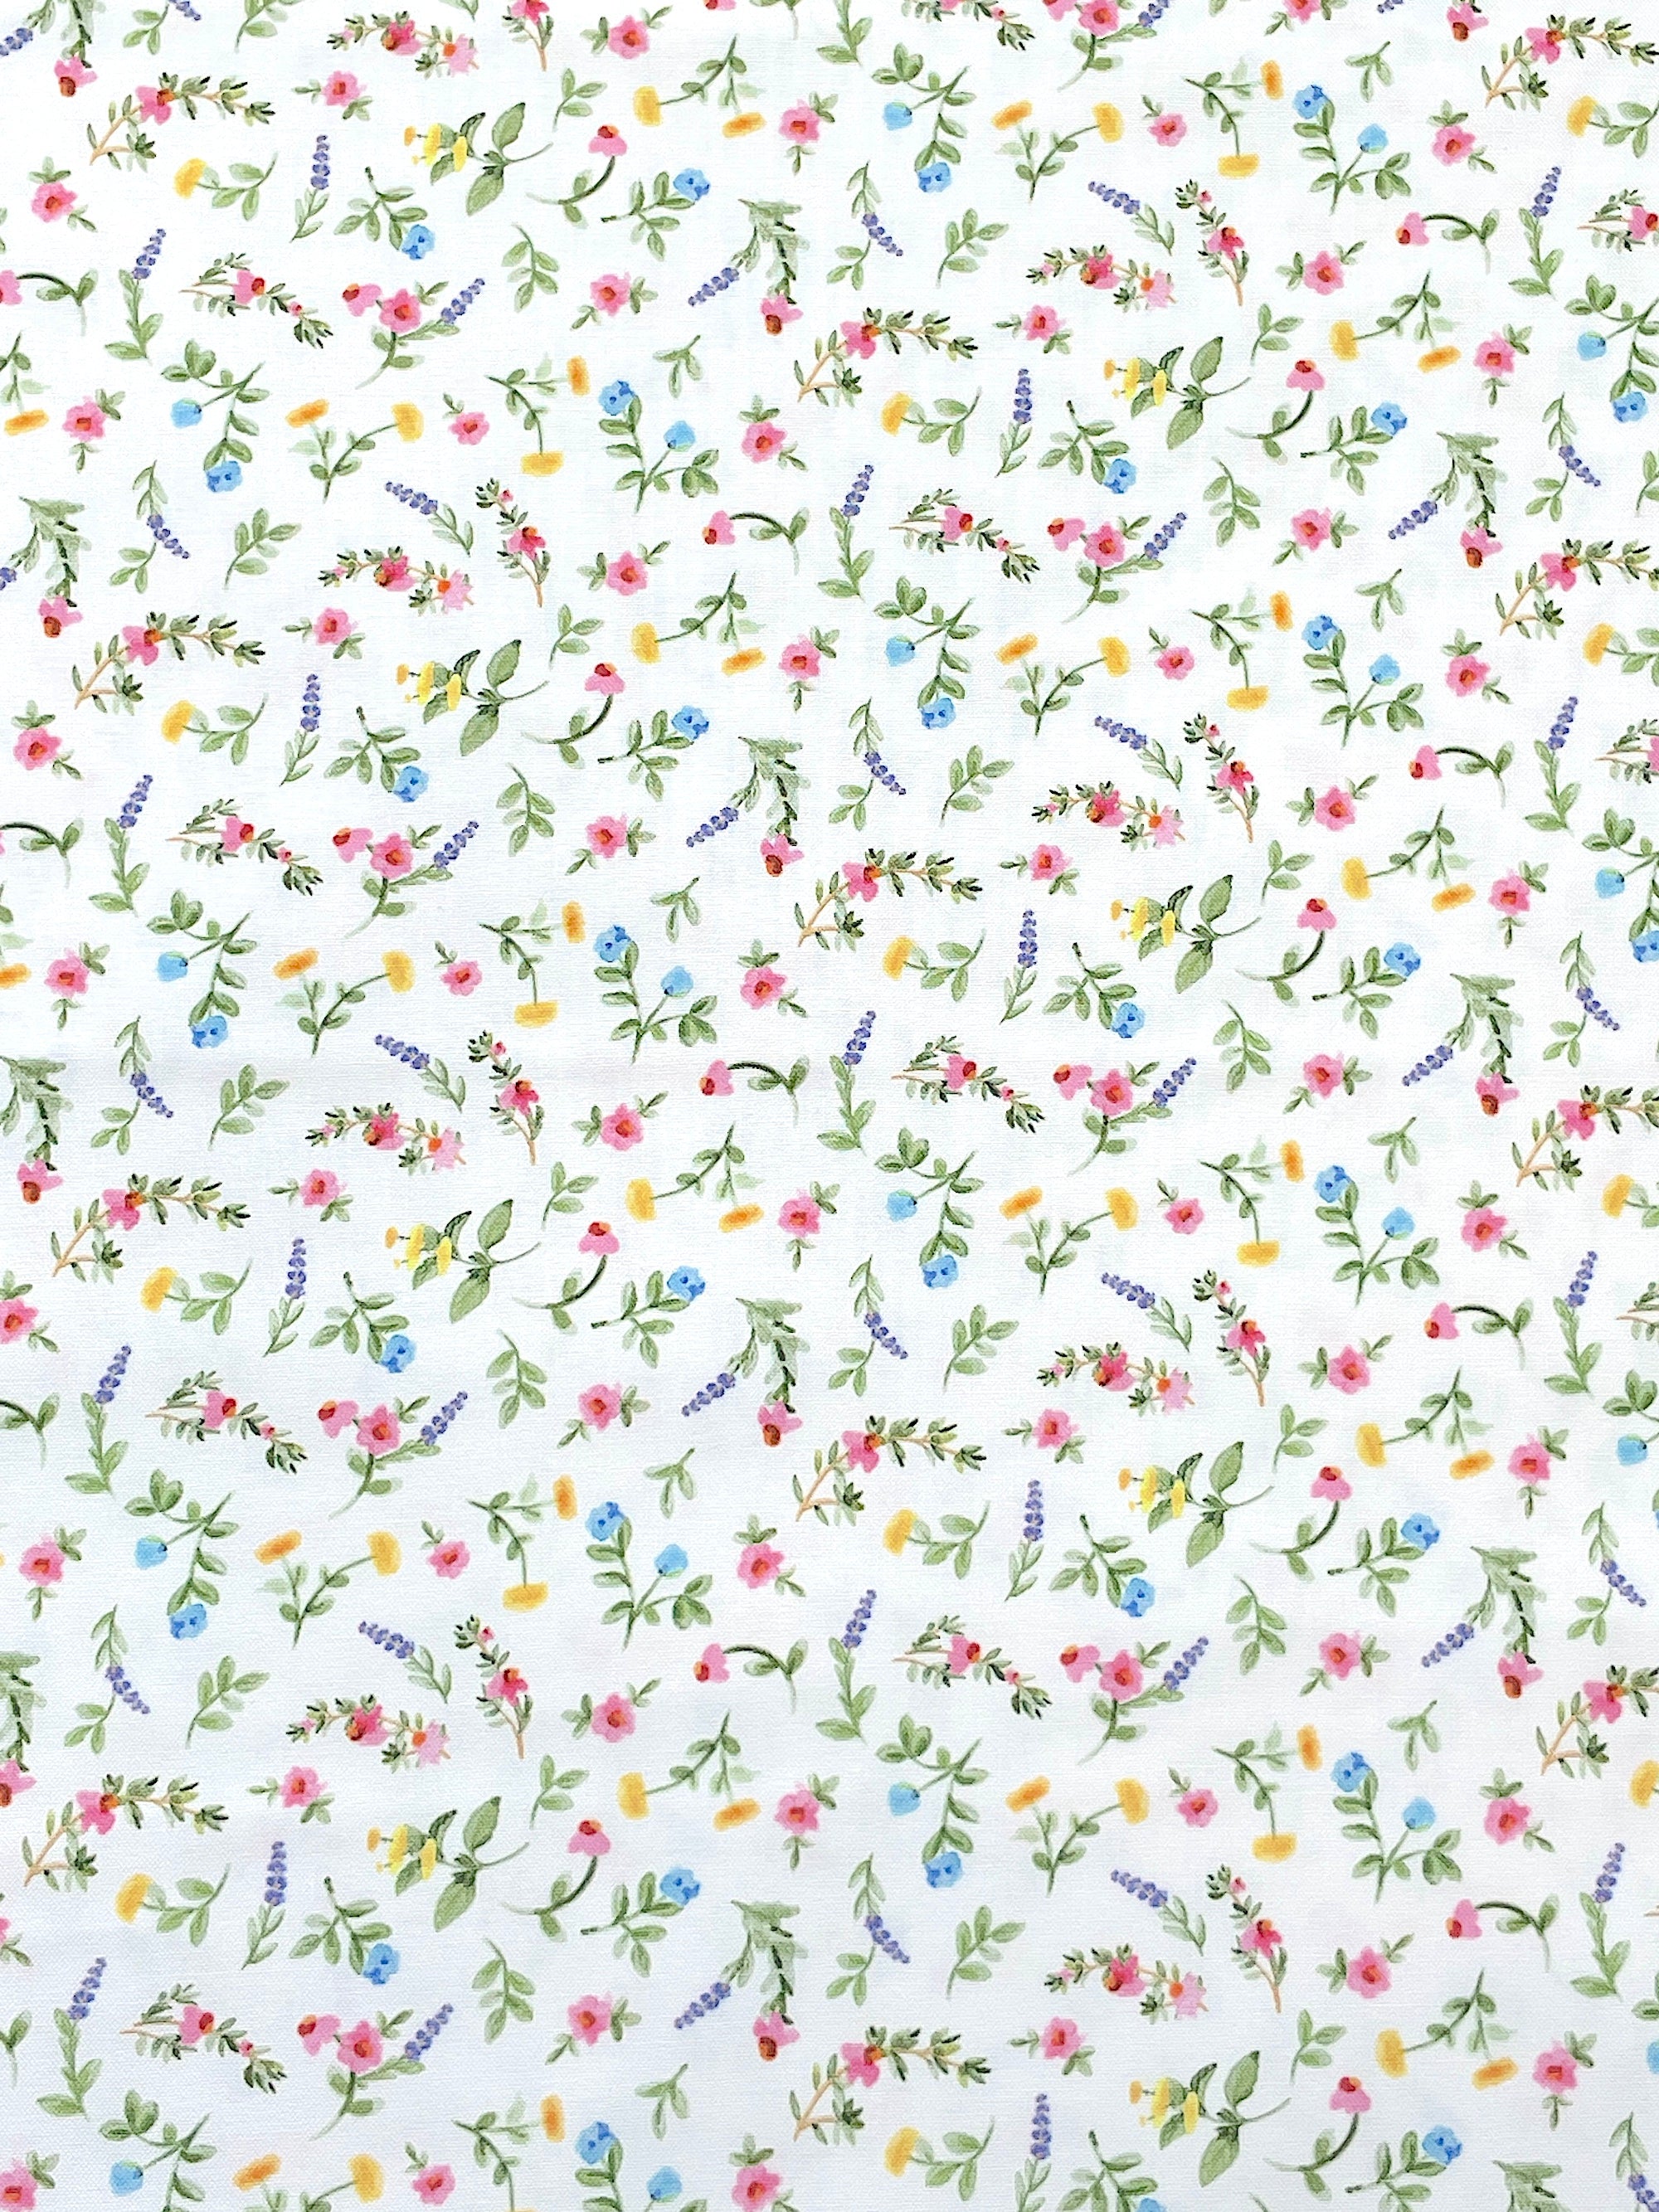 White cotton fabric covered with small pink, blue and yellow fabrics and green stems and leaves.